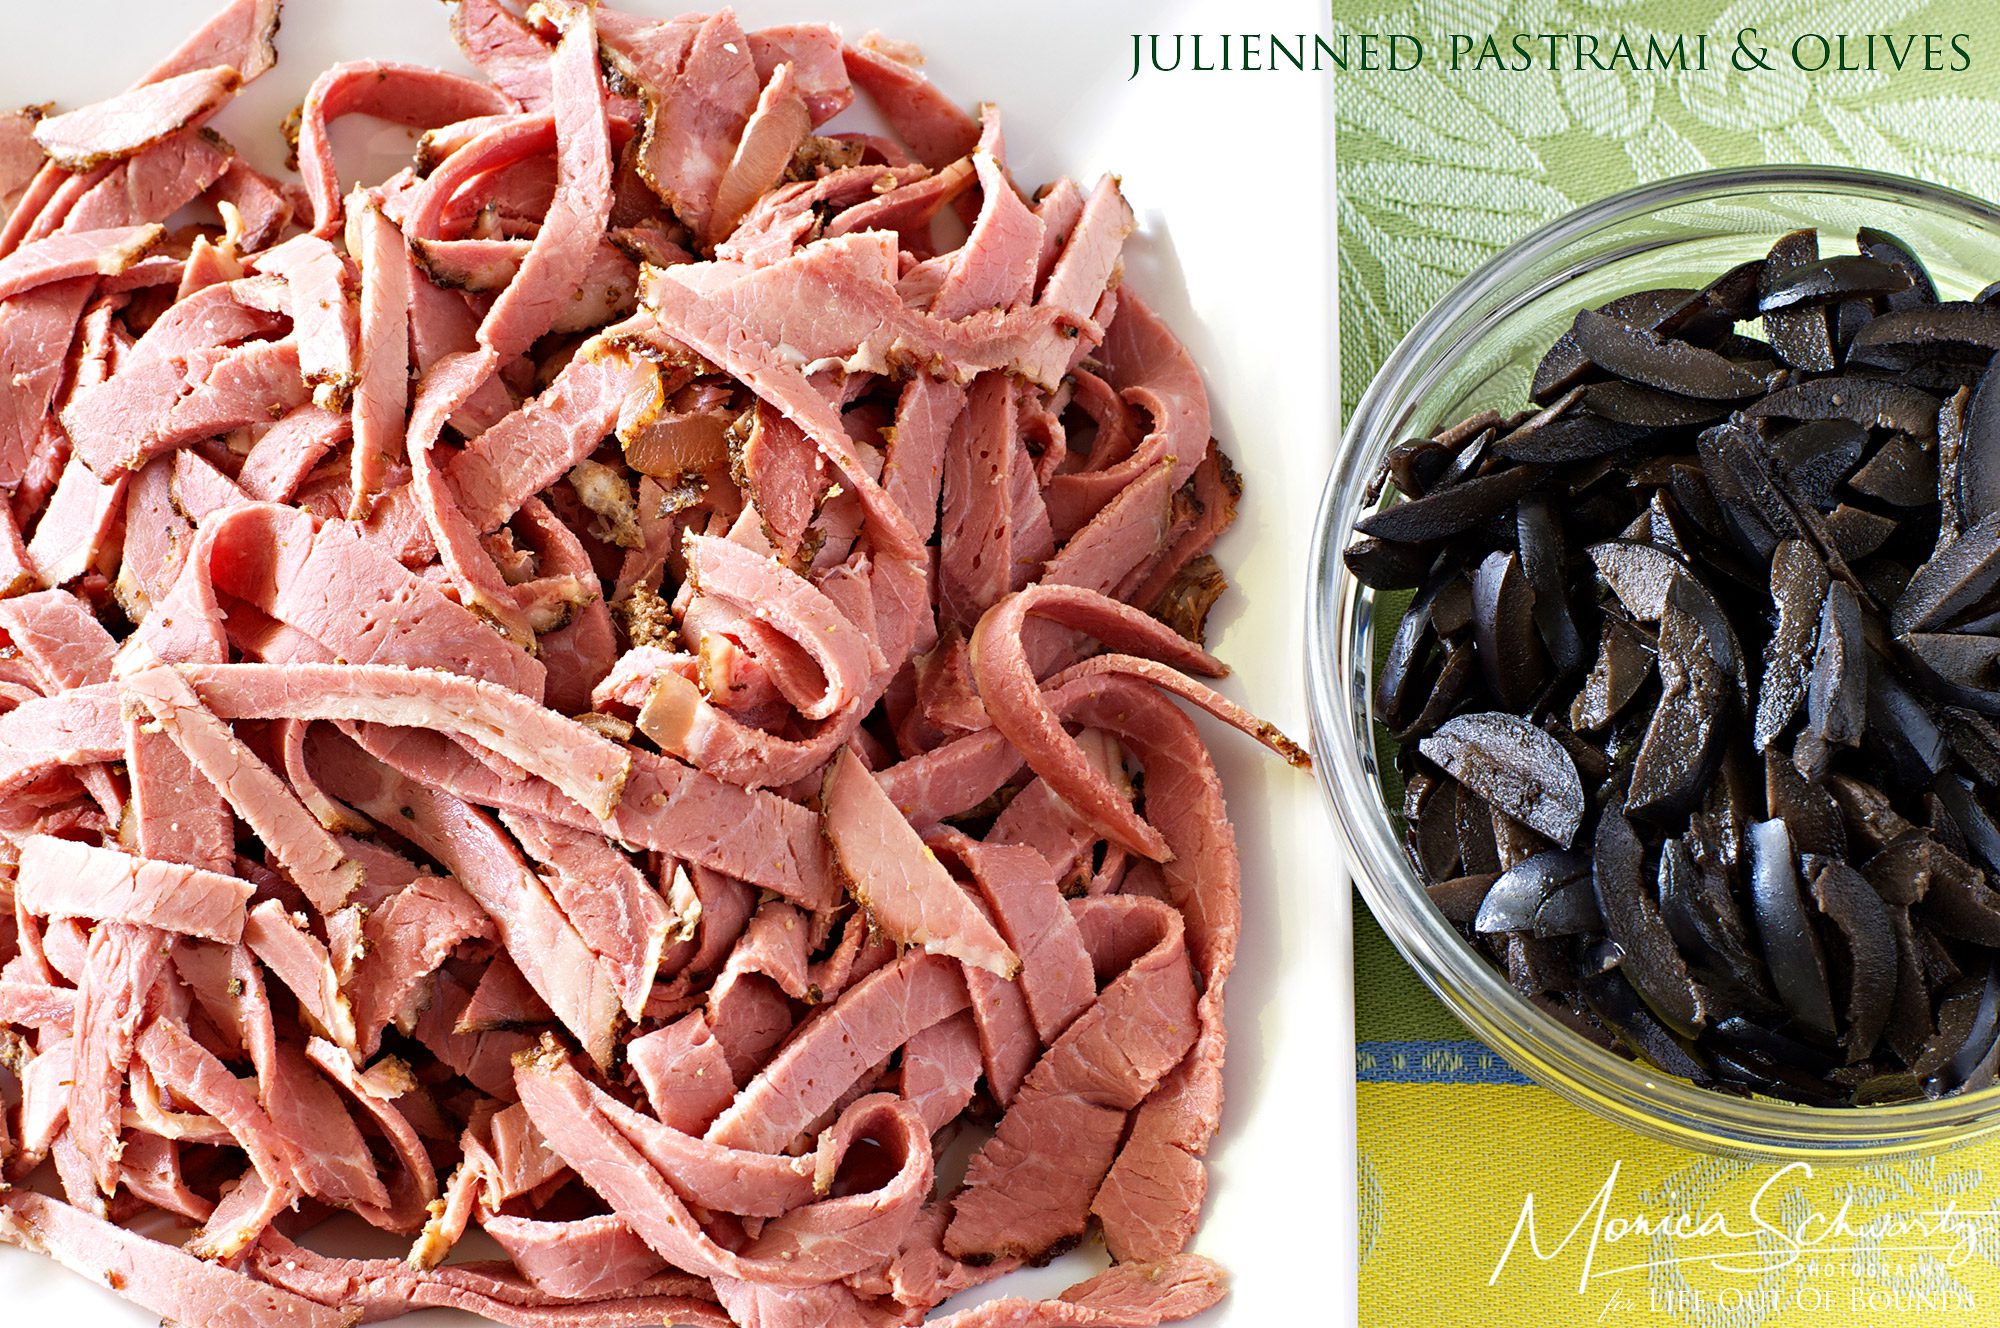 Julienned-pastrami-and-olives-for-Mediterranean-pasta-salad-recipe